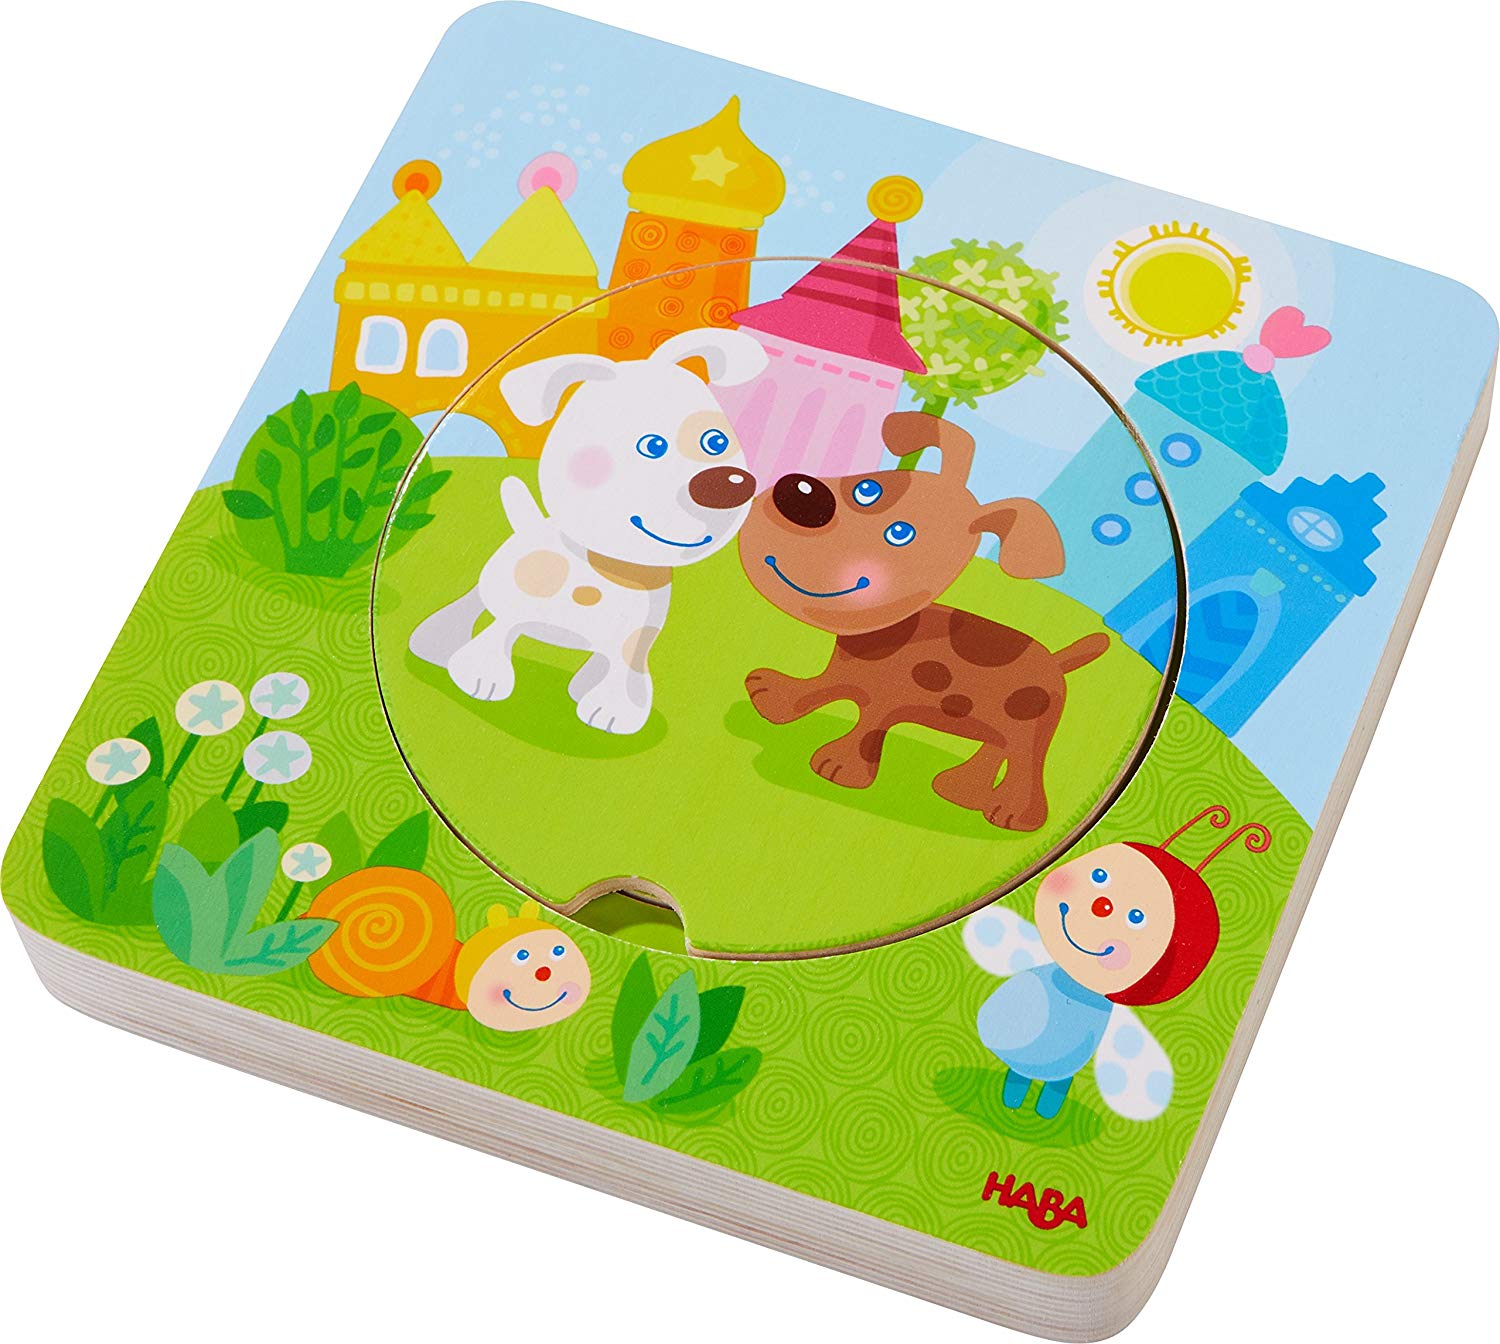 Haba Wooden Puzzle